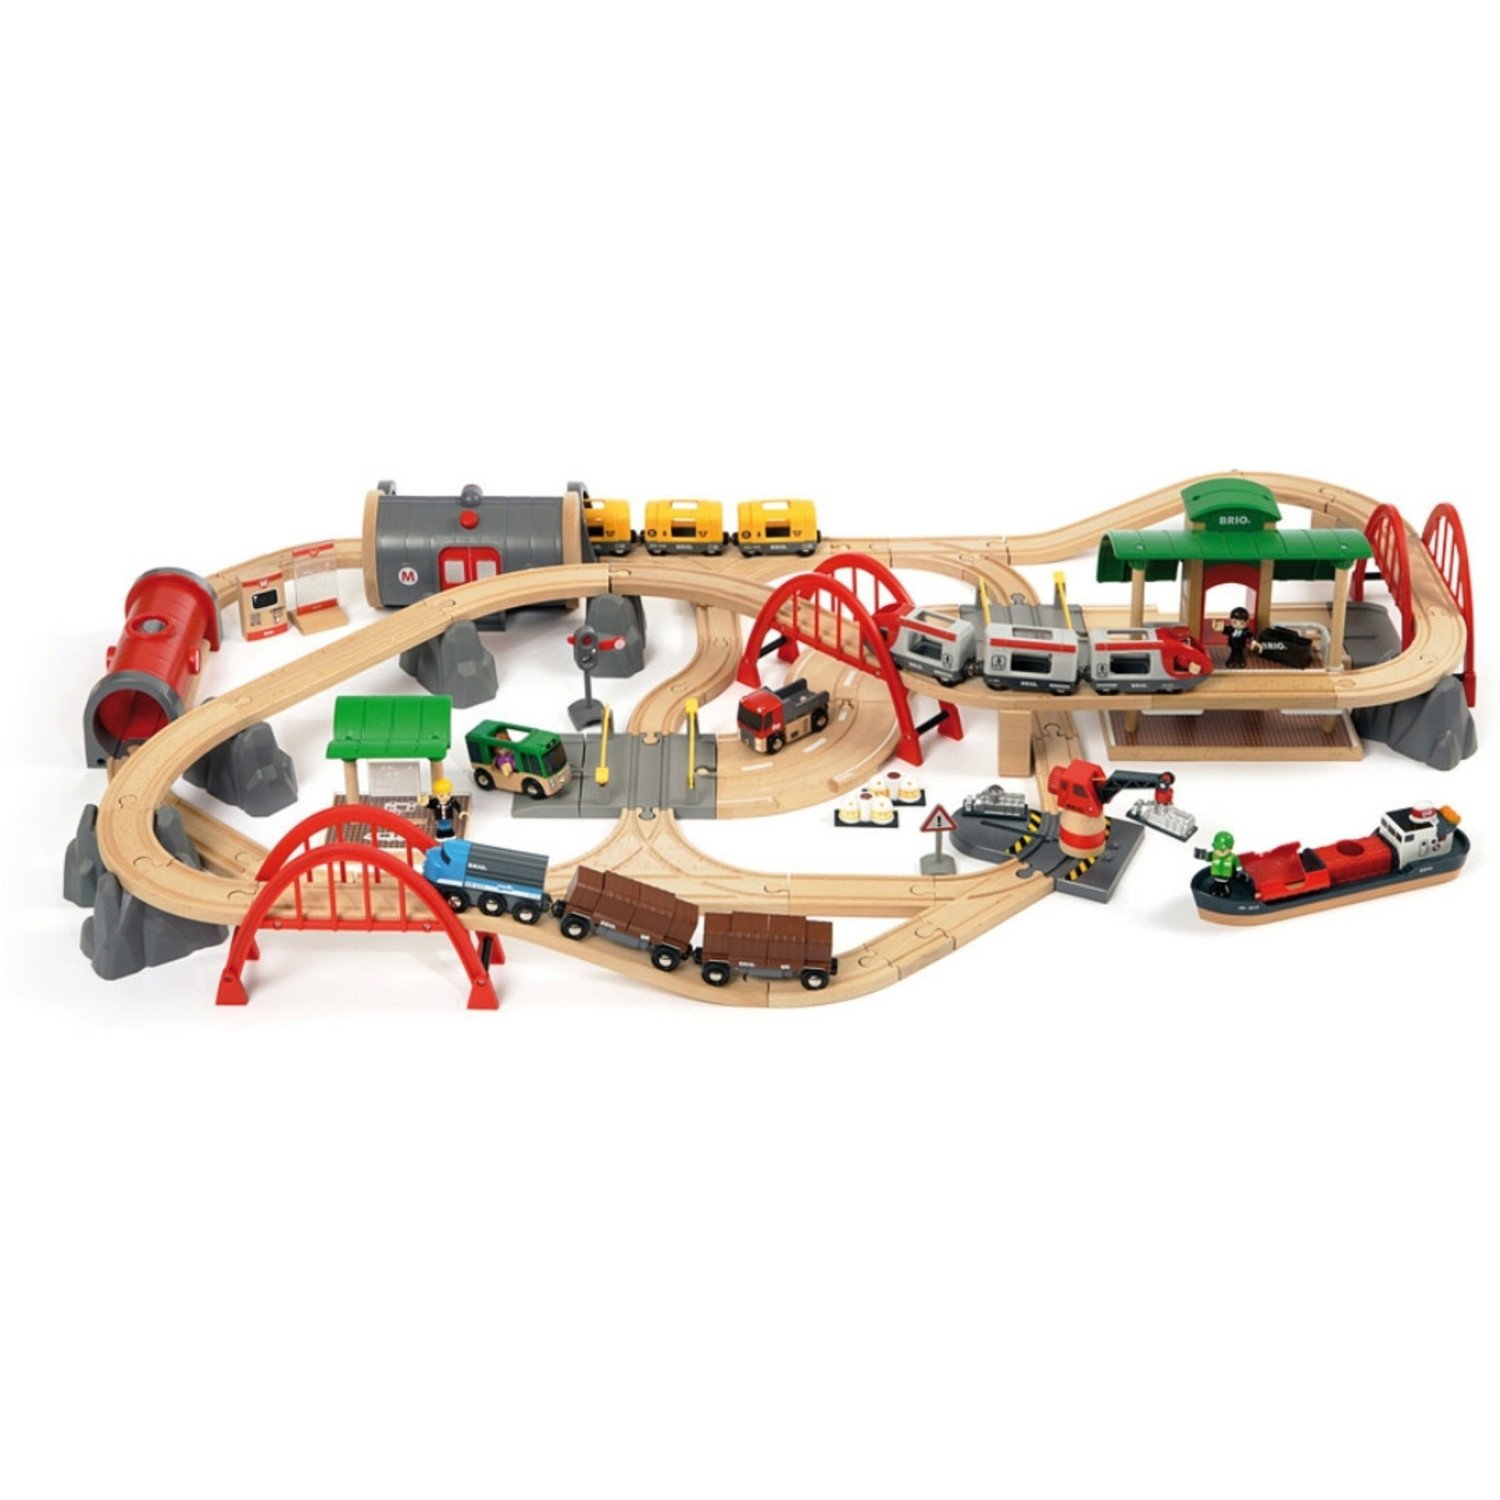 Deluxe Railway Set - Mudpuddles Toys and Books